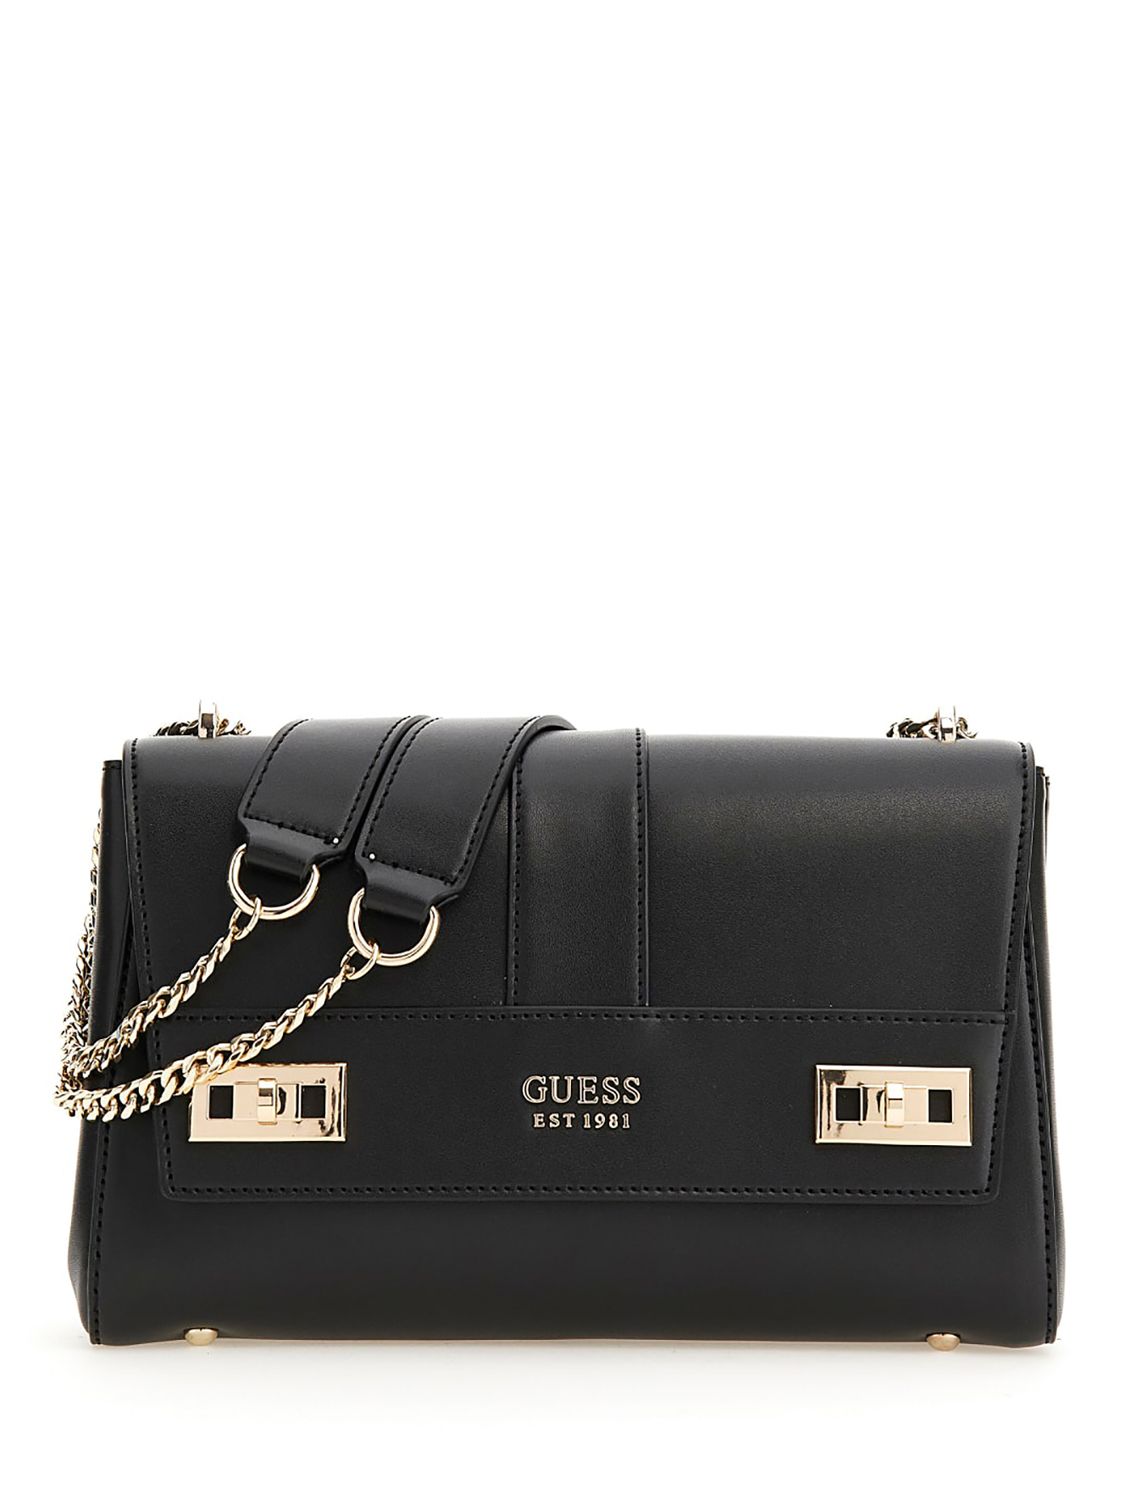 GUESS Katey Luxury Shoulder Bag Pink - Womens from PILOT UK